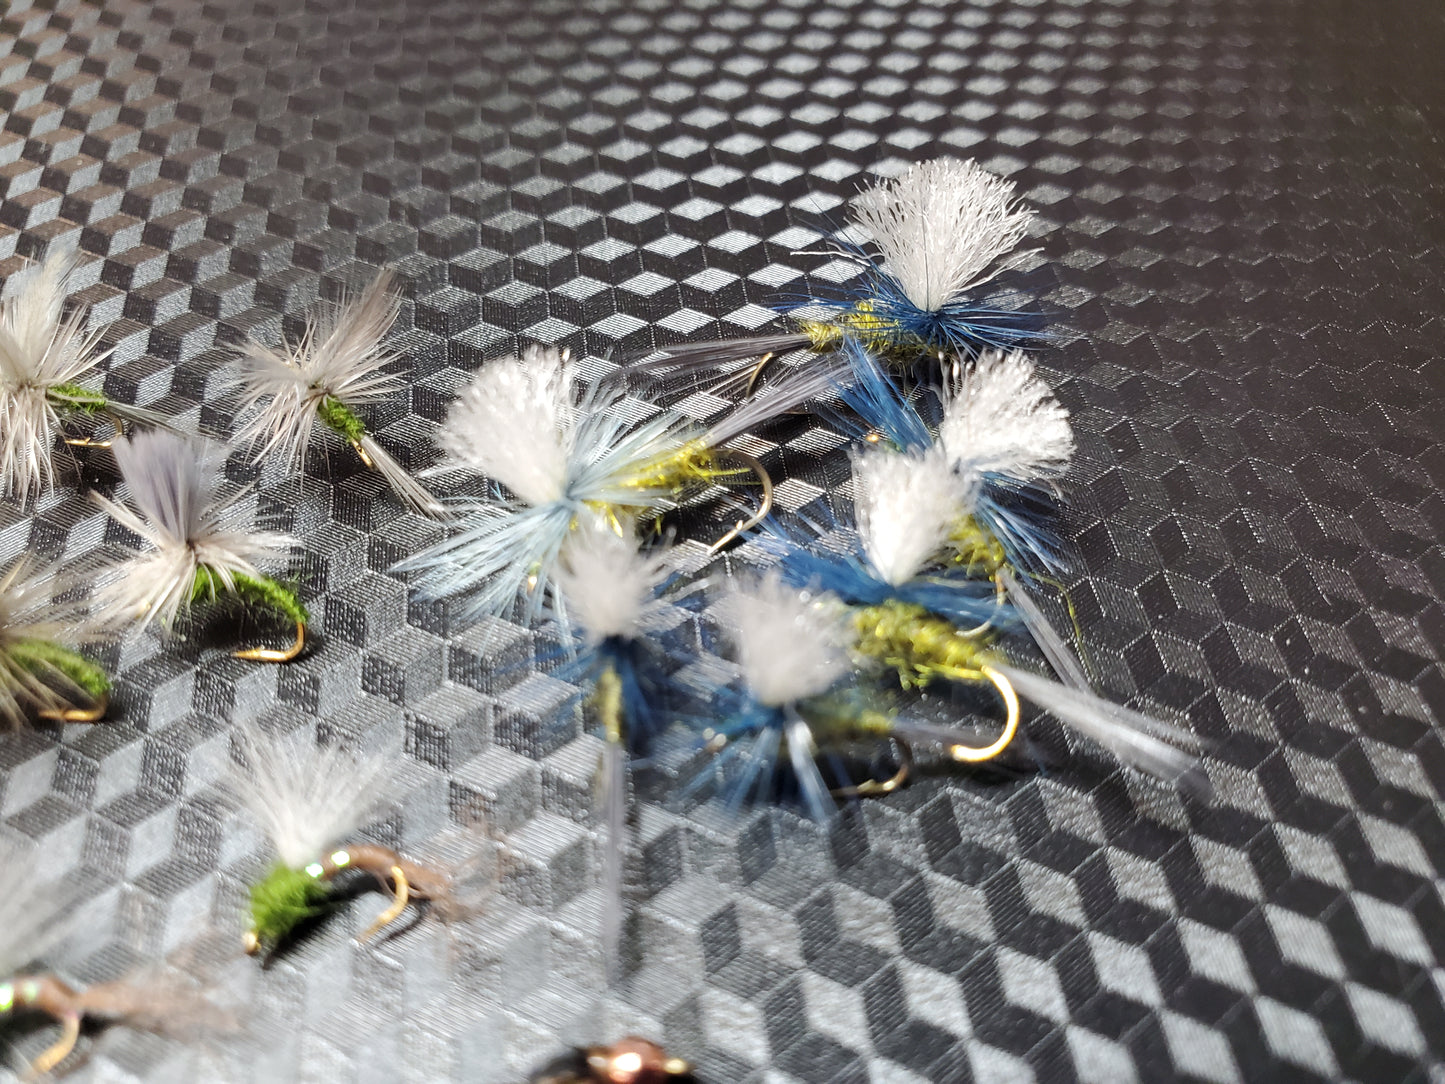 Blue Wing Olive Life Cycle Fly Selection, BWO Fly Selection 20 Flies